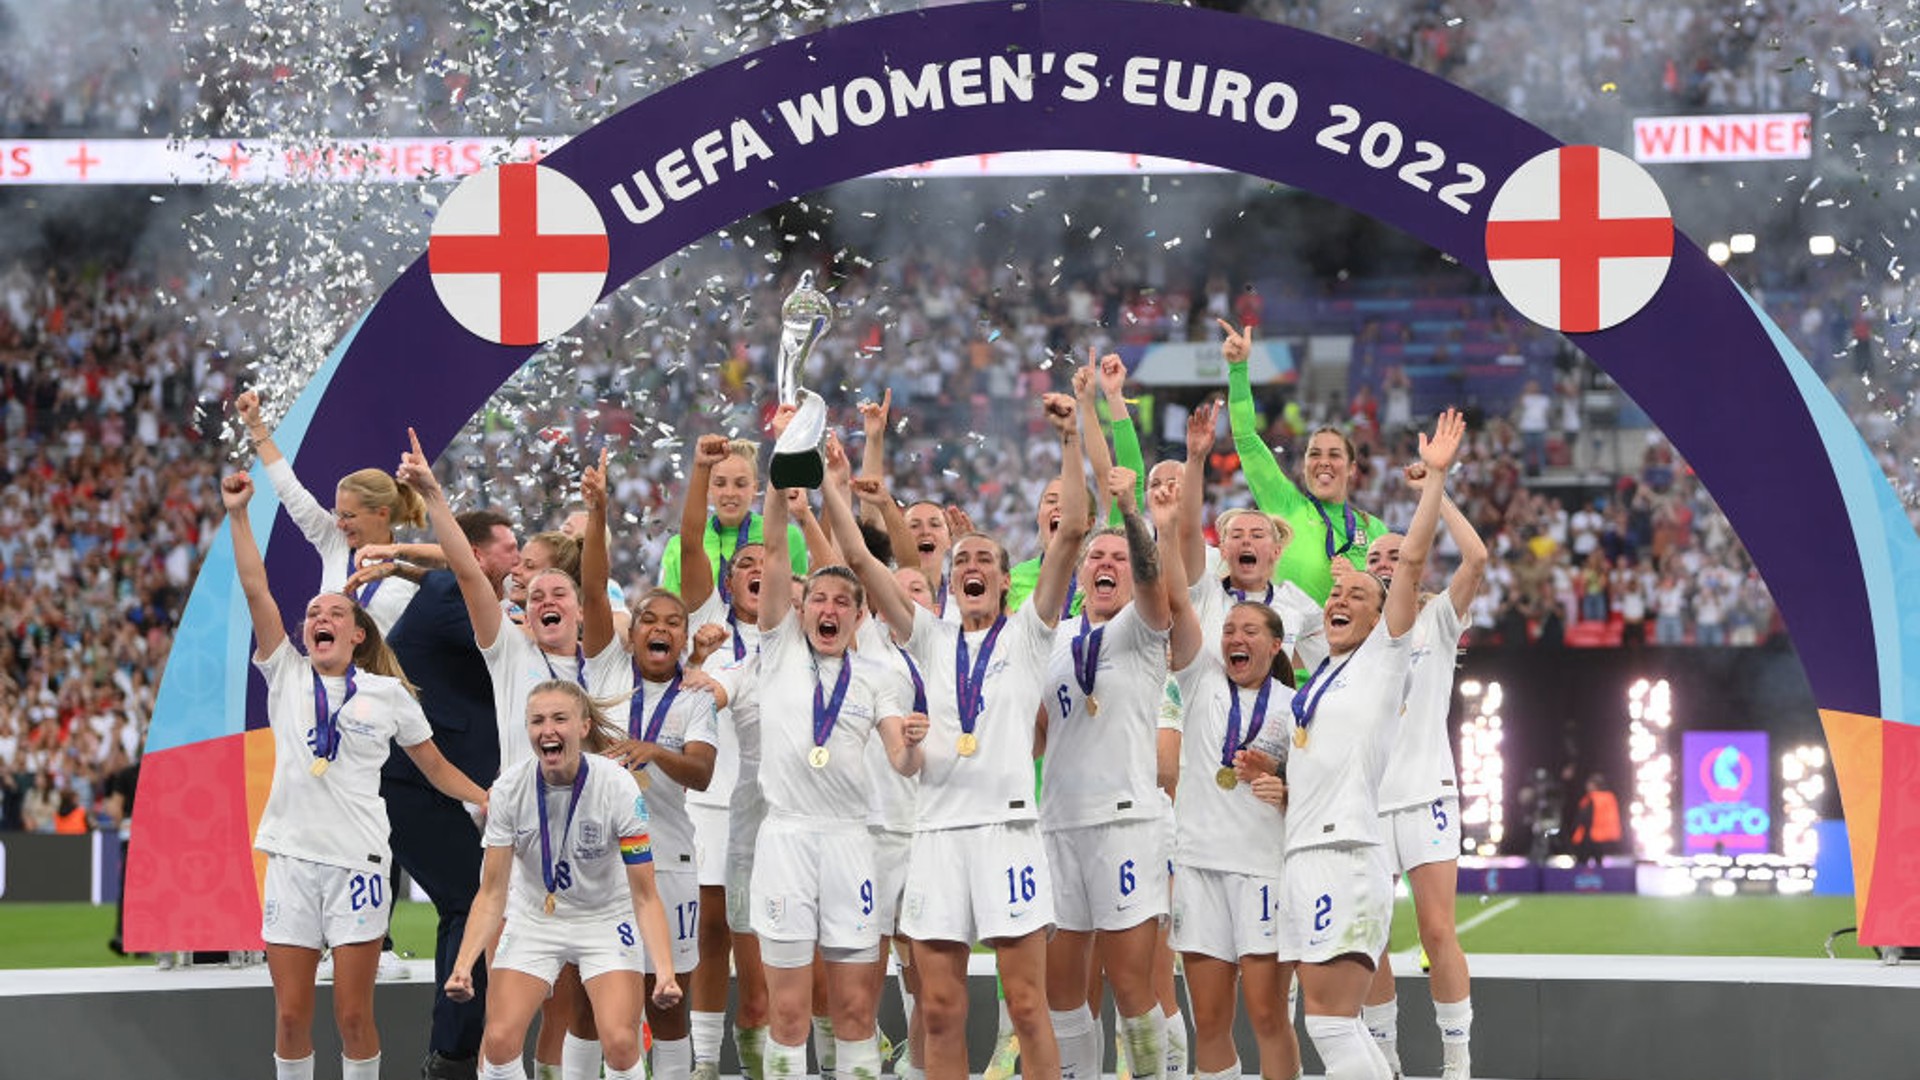 EURO 2022 glory is what dreams are made of, says Lionesses match-winner Kelly